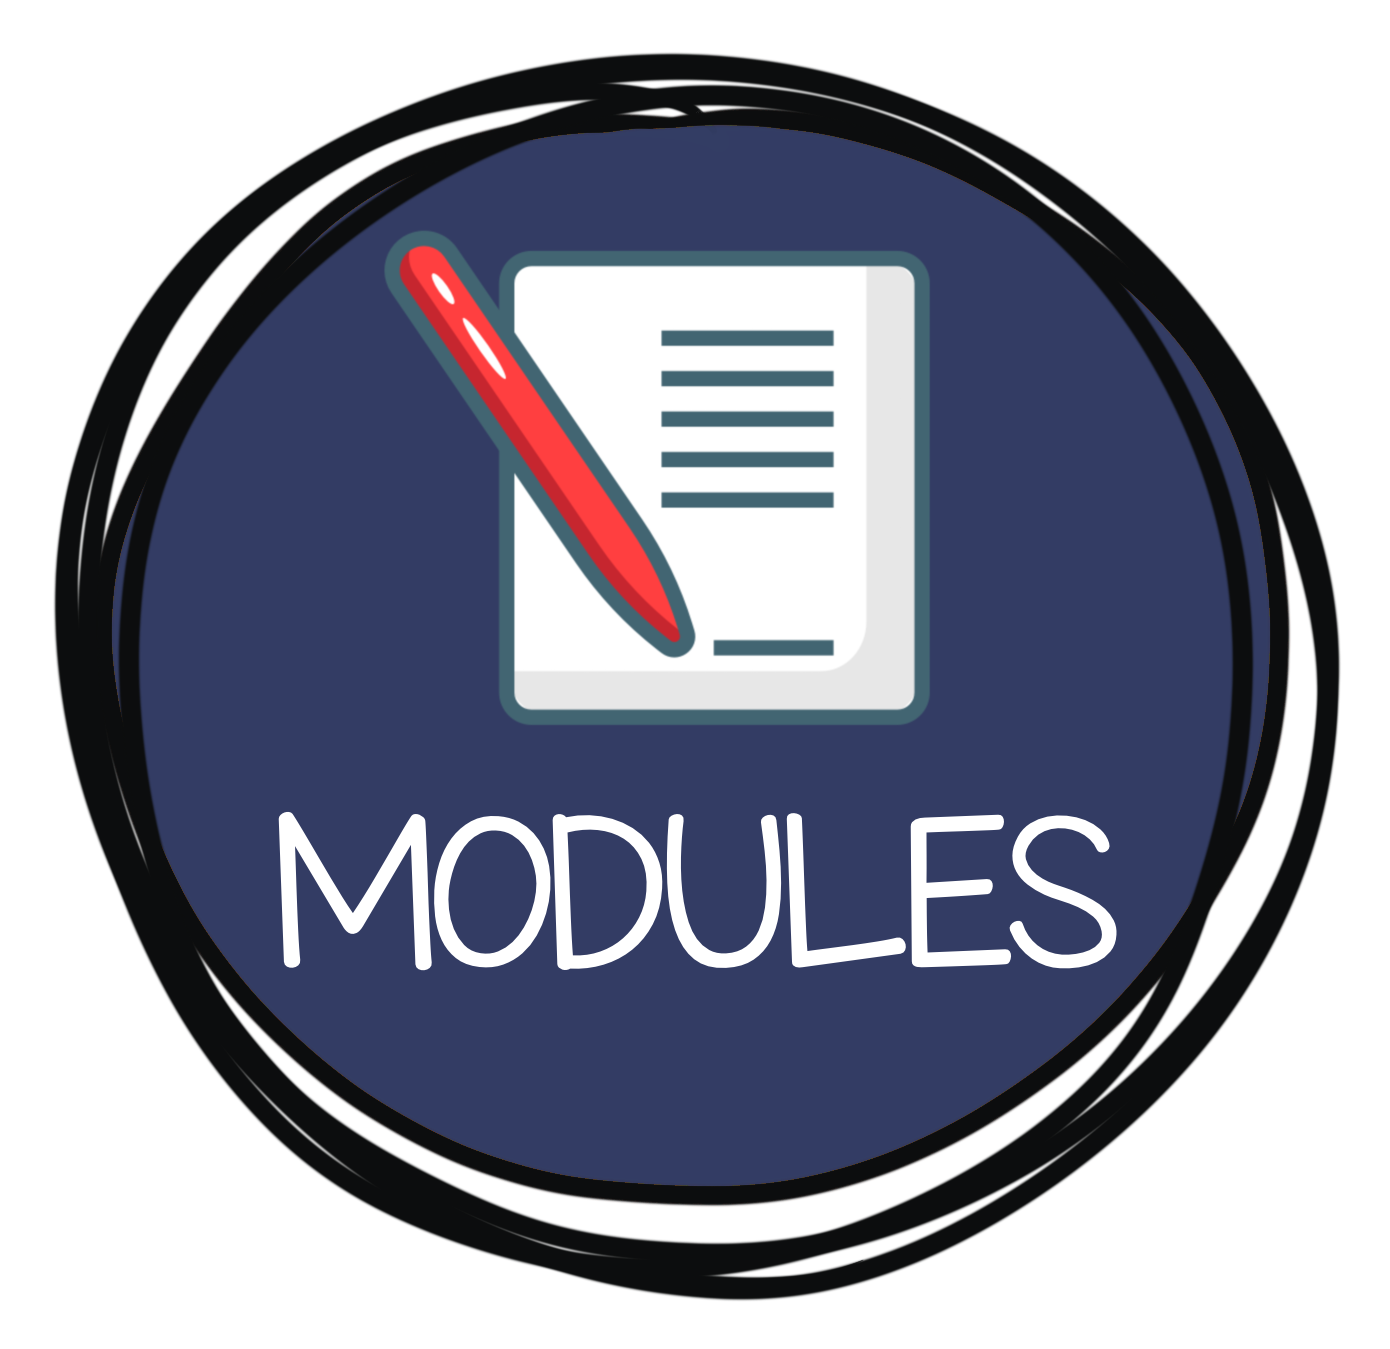 Modules_button.PNG